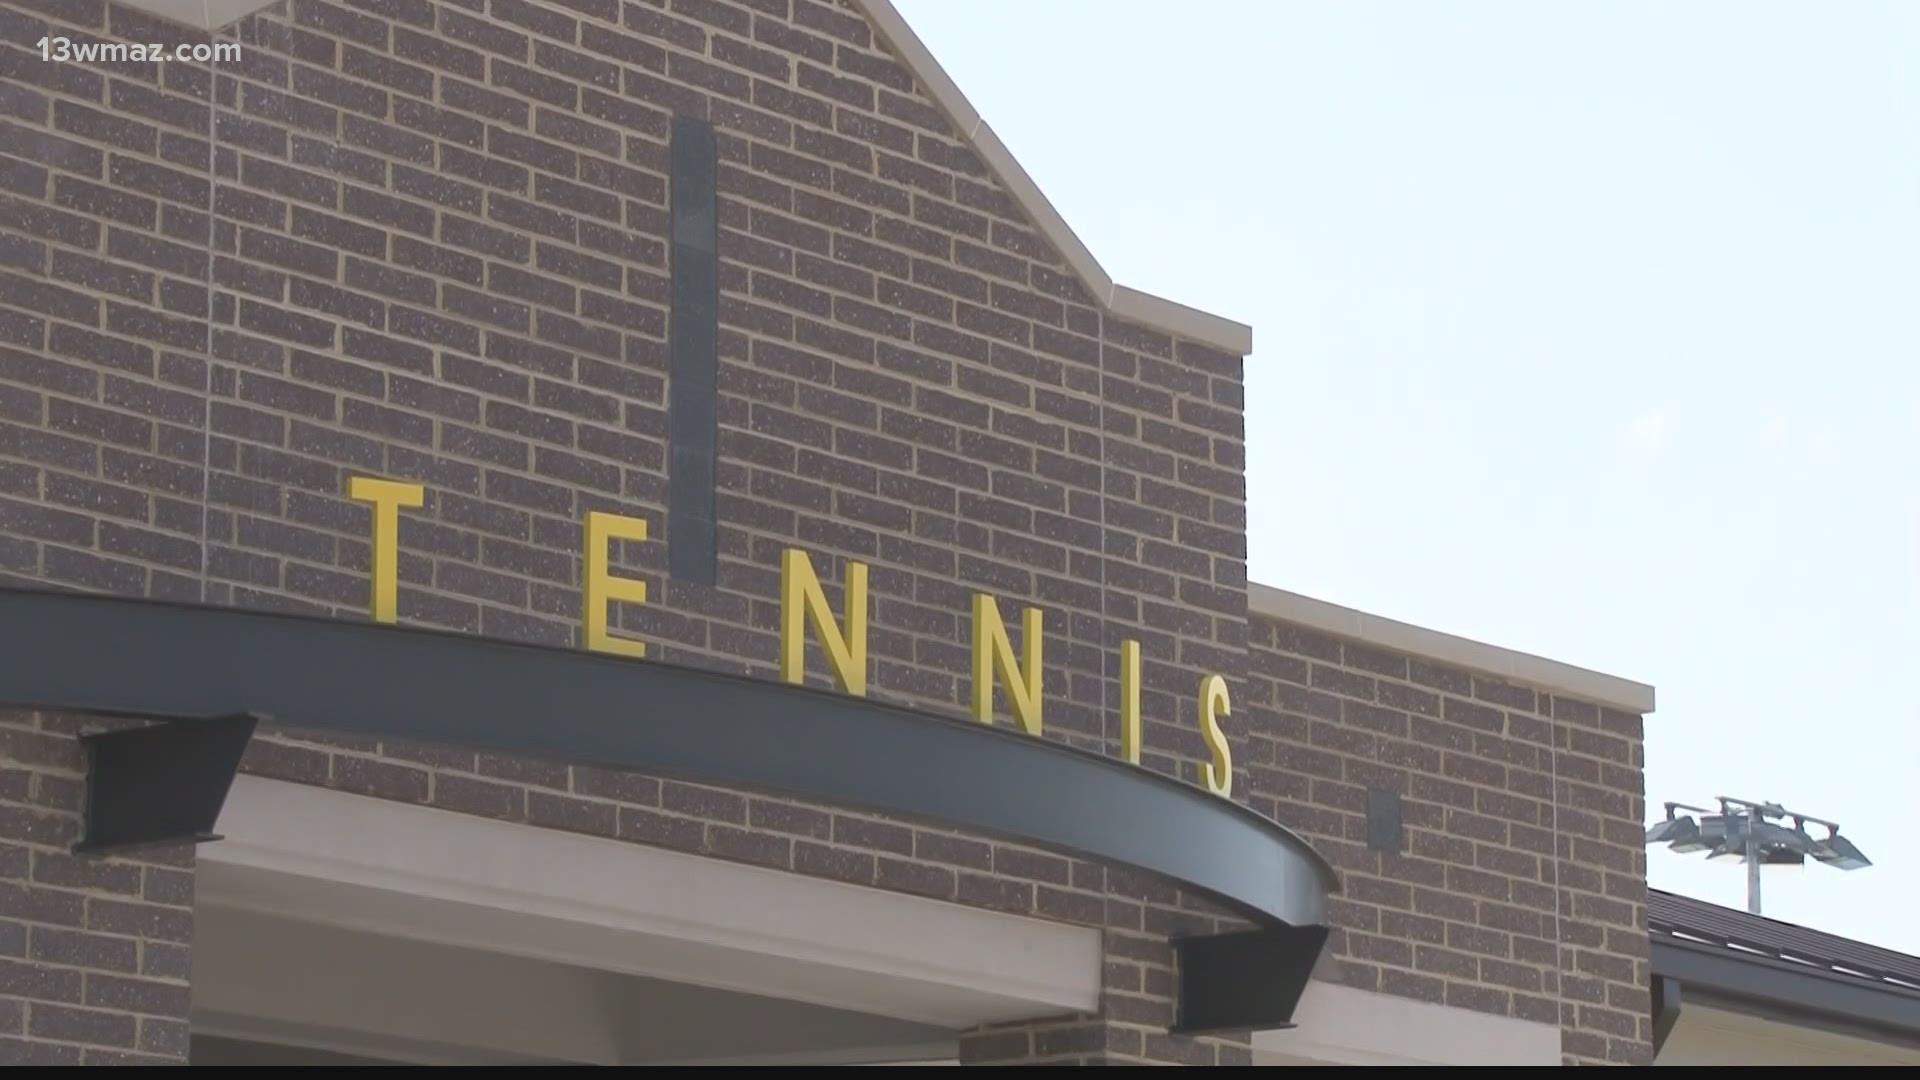 On Monday, Mayor and city council voted to pay the Board of Education $1.7 million to use their tennis complex built last year